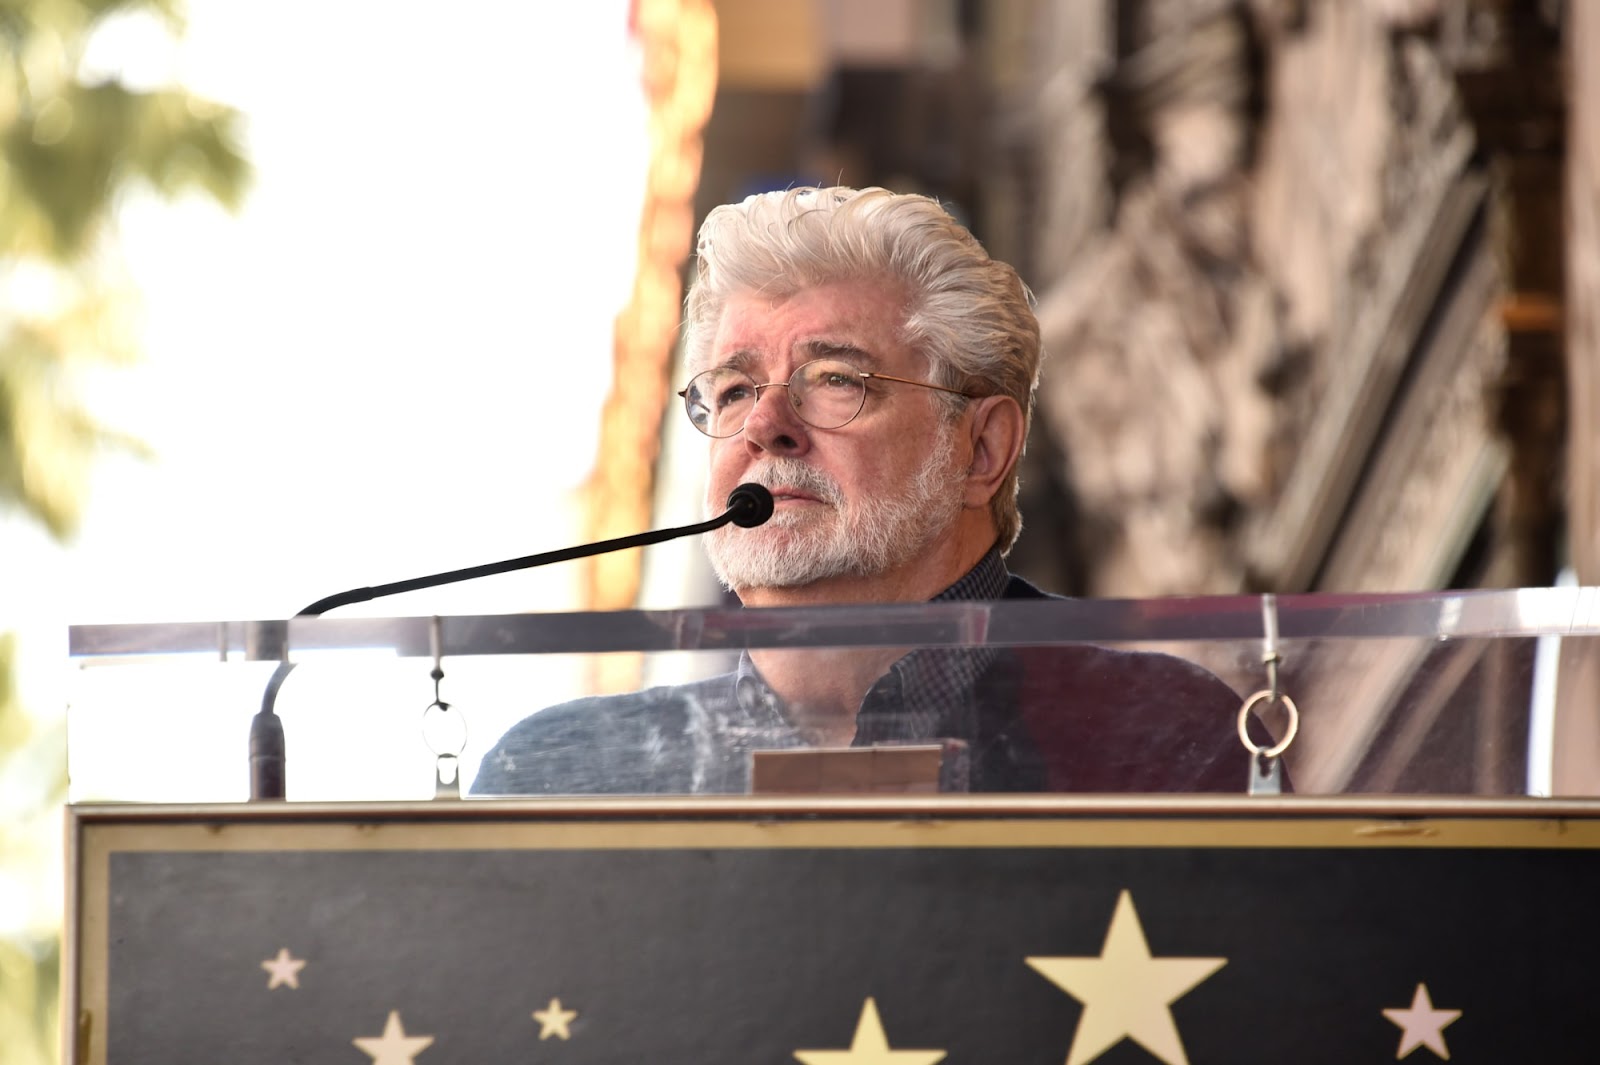 <u>Query</u>: The creator of the famous Star Wars franchise giving a speech<br>
      <u>Named Entity</u>: George Lucas